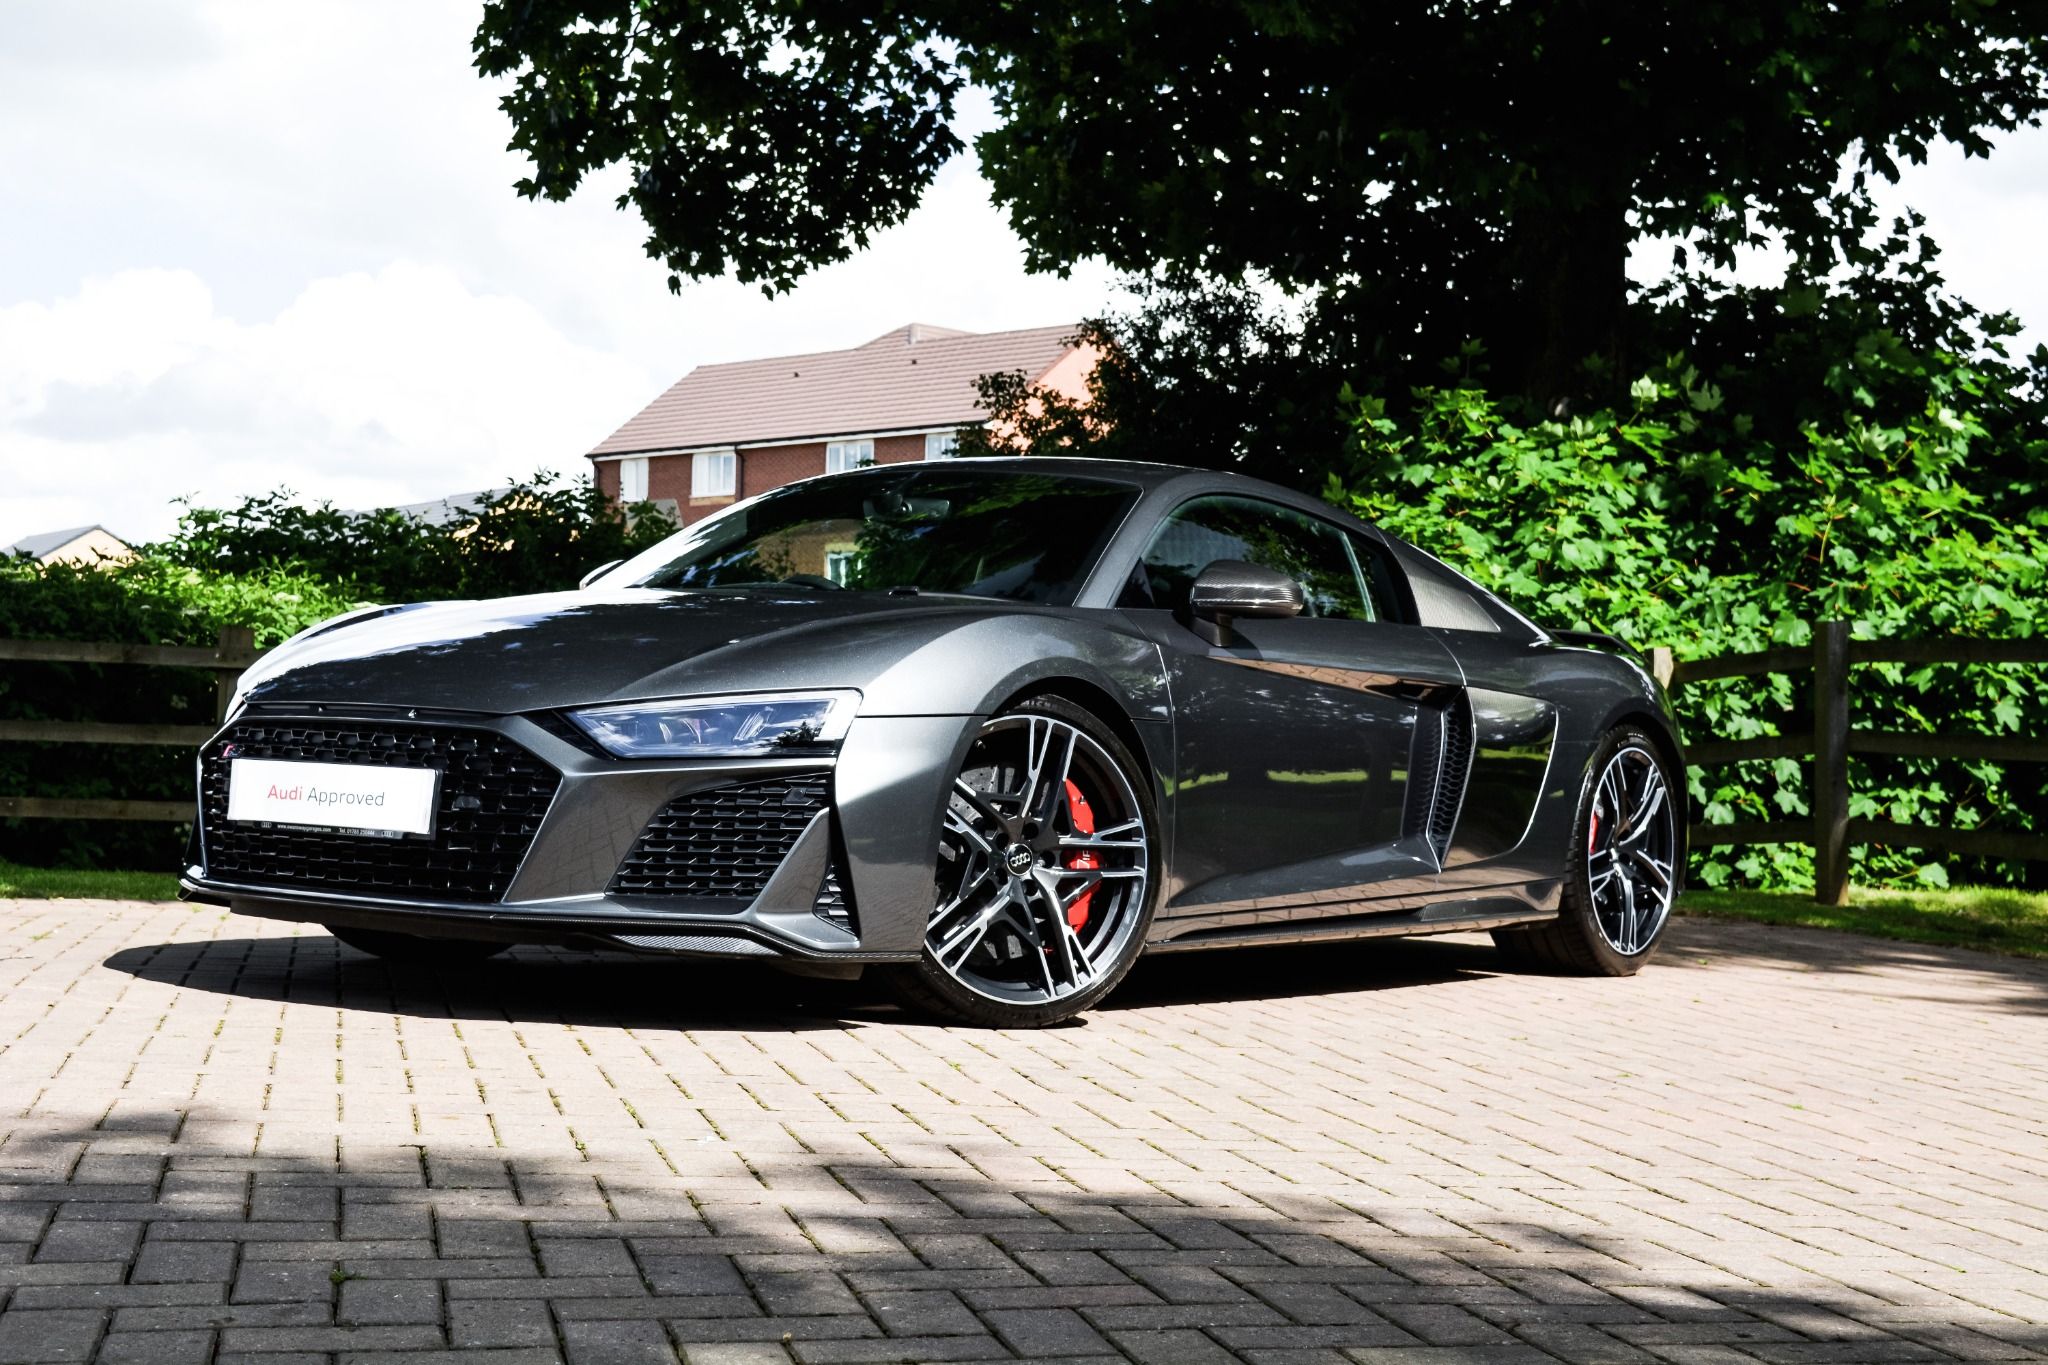 All black Audi R8 with red brake pads parked underneath tree